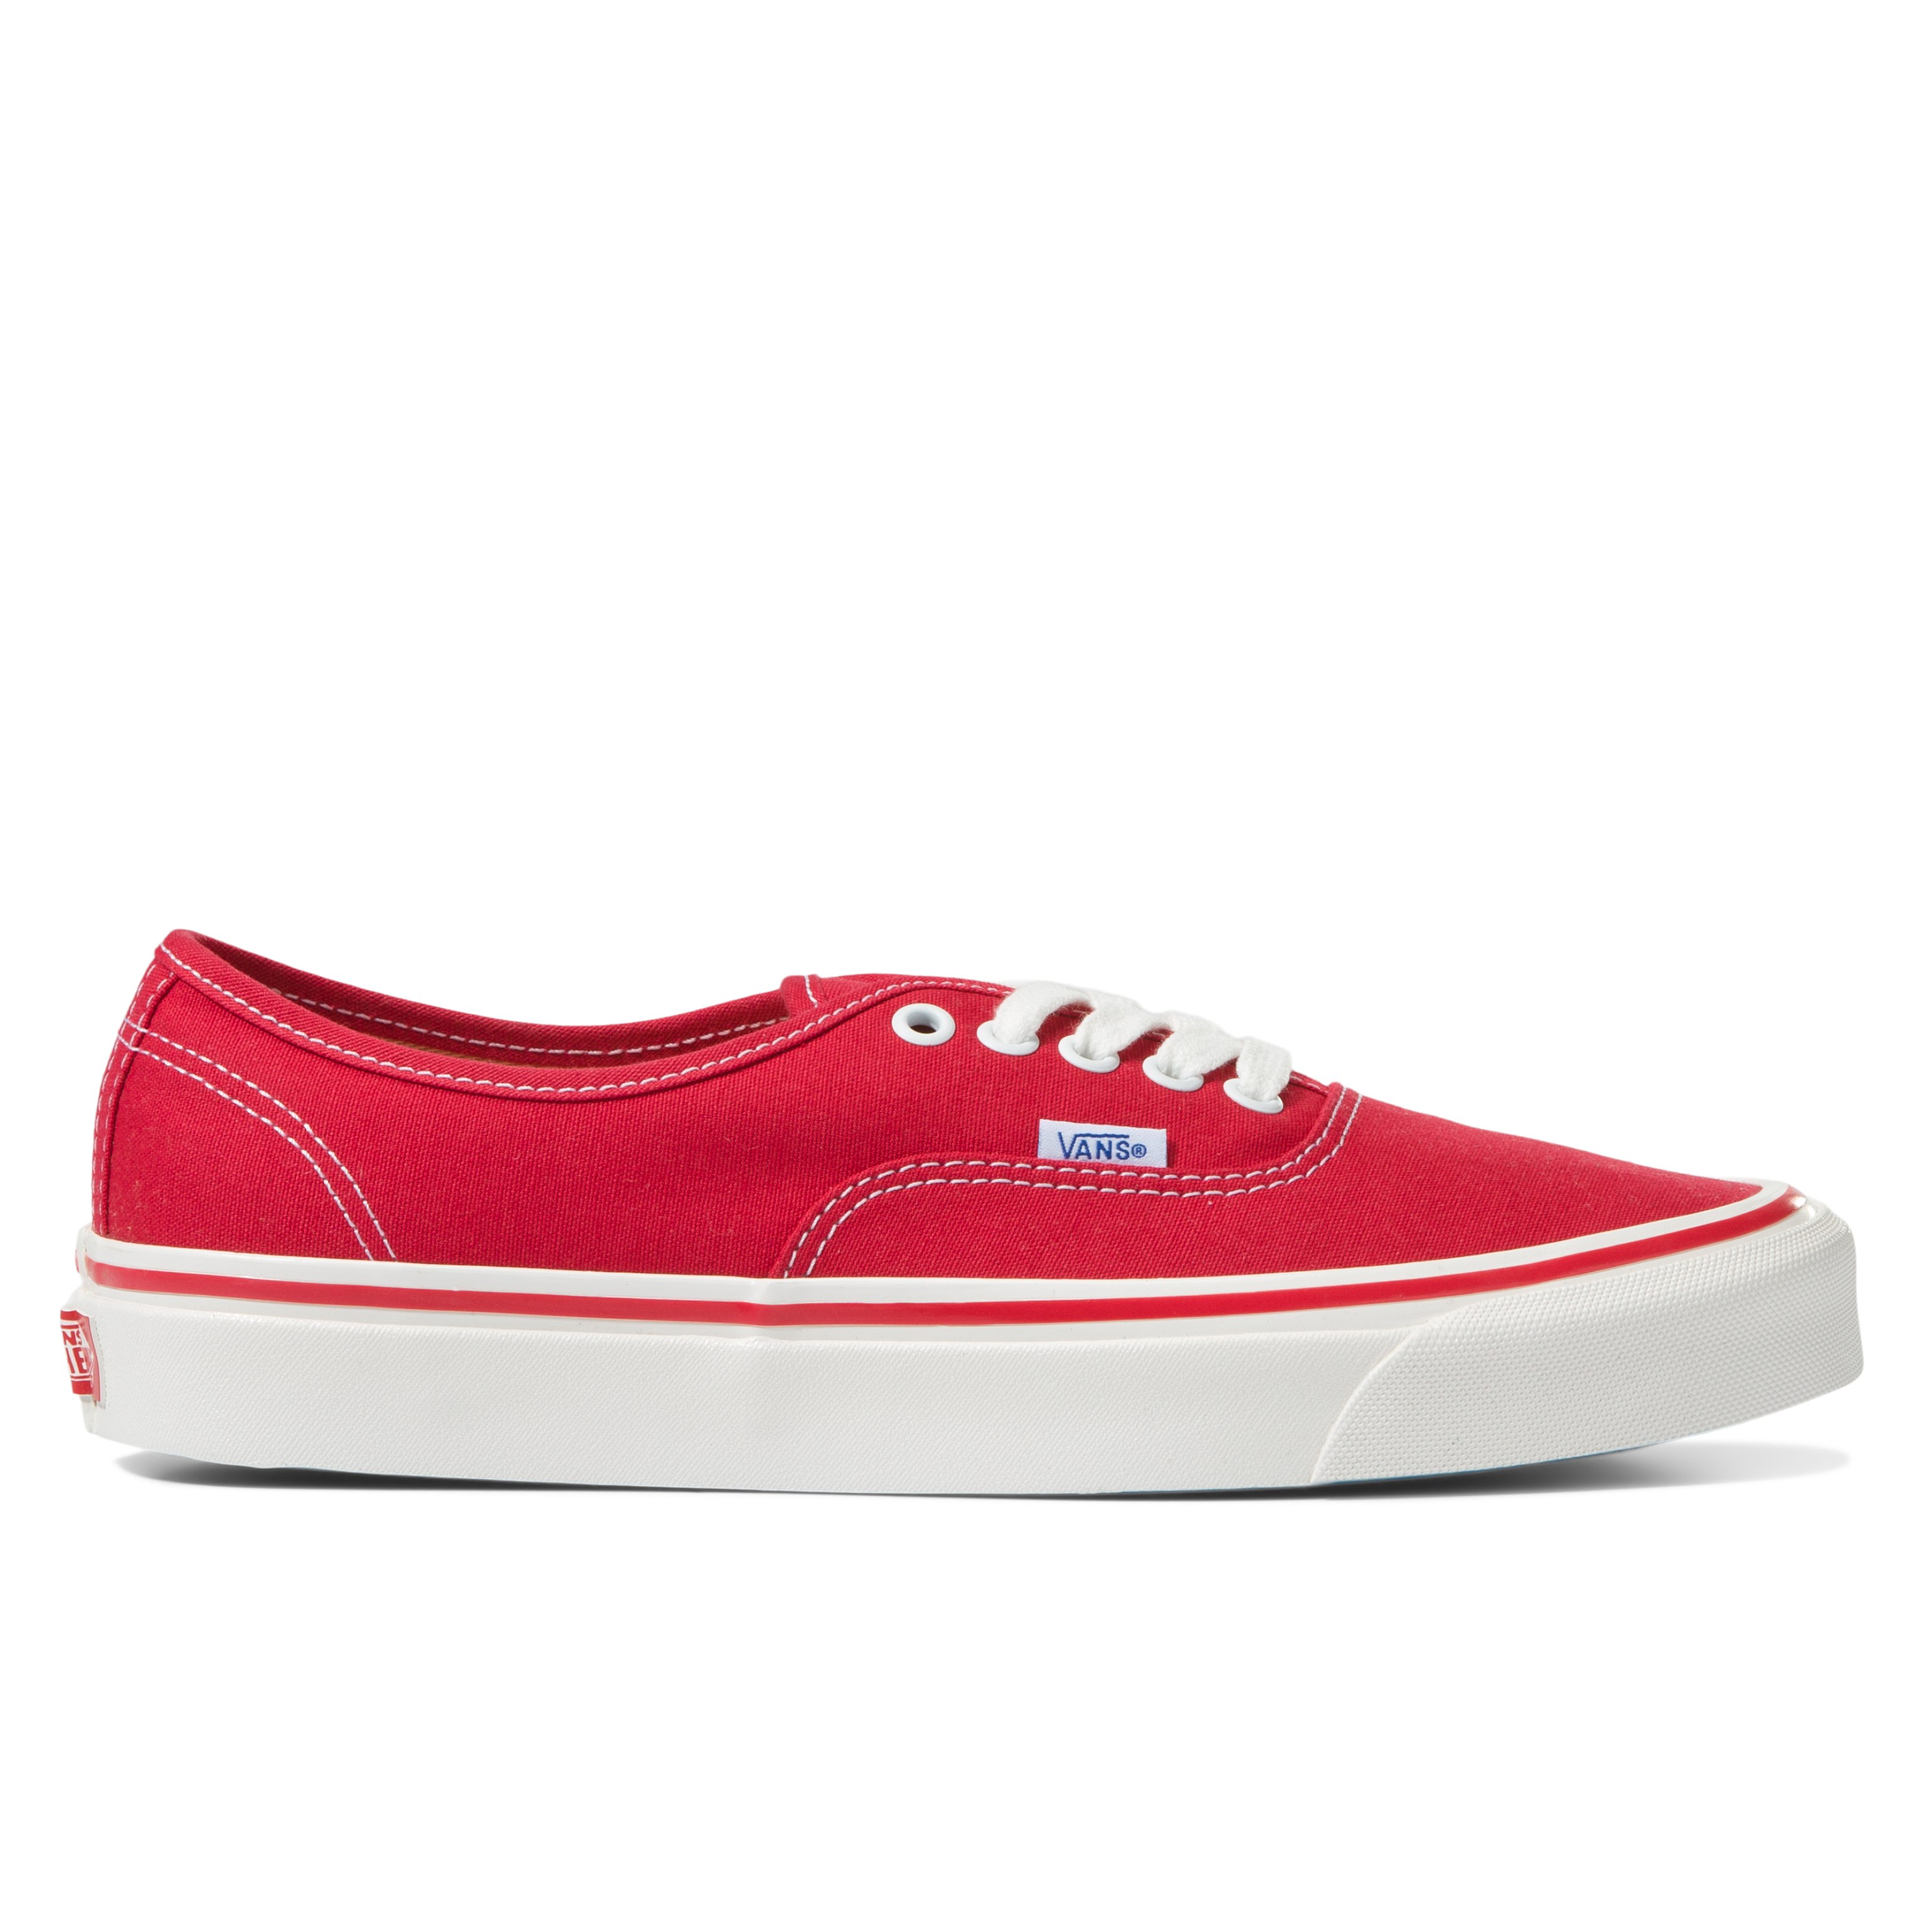 Vans Authentic 44 Deck DX Sneaker - Anaheim Factory Red | Casual